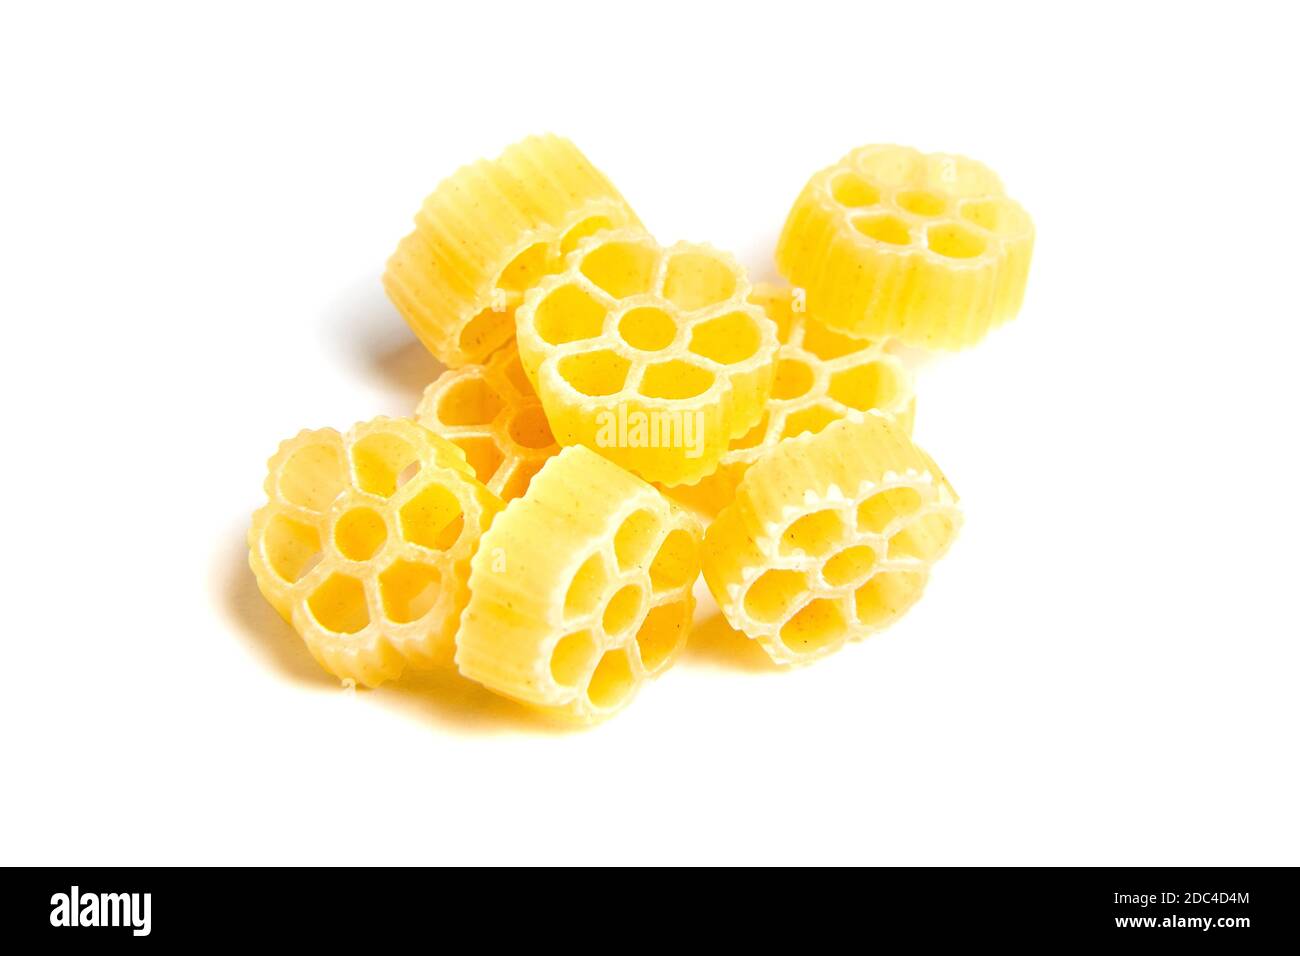 Raw uncooked Rotelle dry italian pasta. Ruote, wagon wheel shaped. Heap, isolated on white background Stock Photo